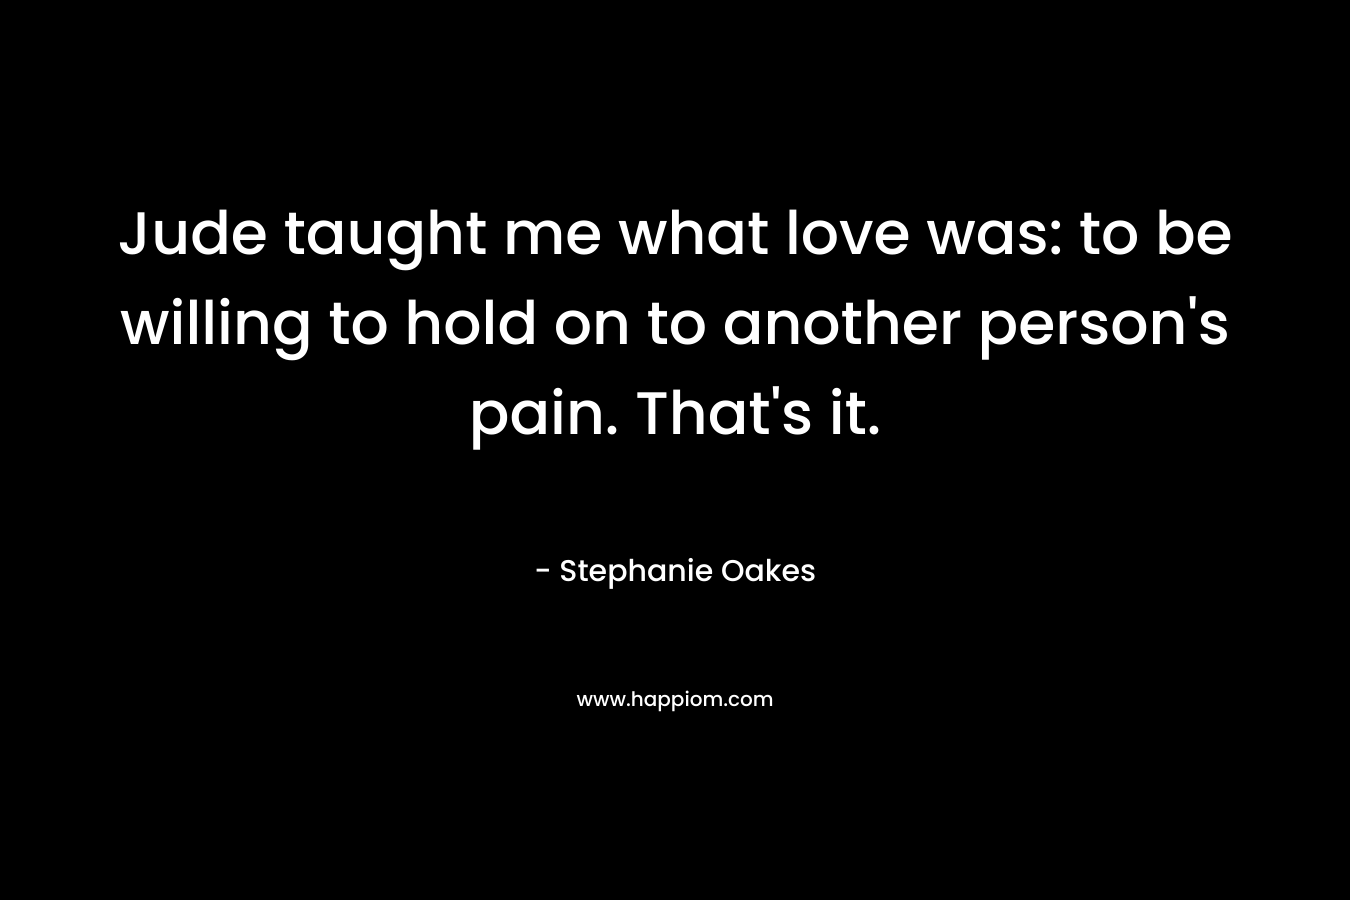 Jude taught me what love was: to be willing to hold on to another person’s pain. That’s it. – Stephanie Oakes